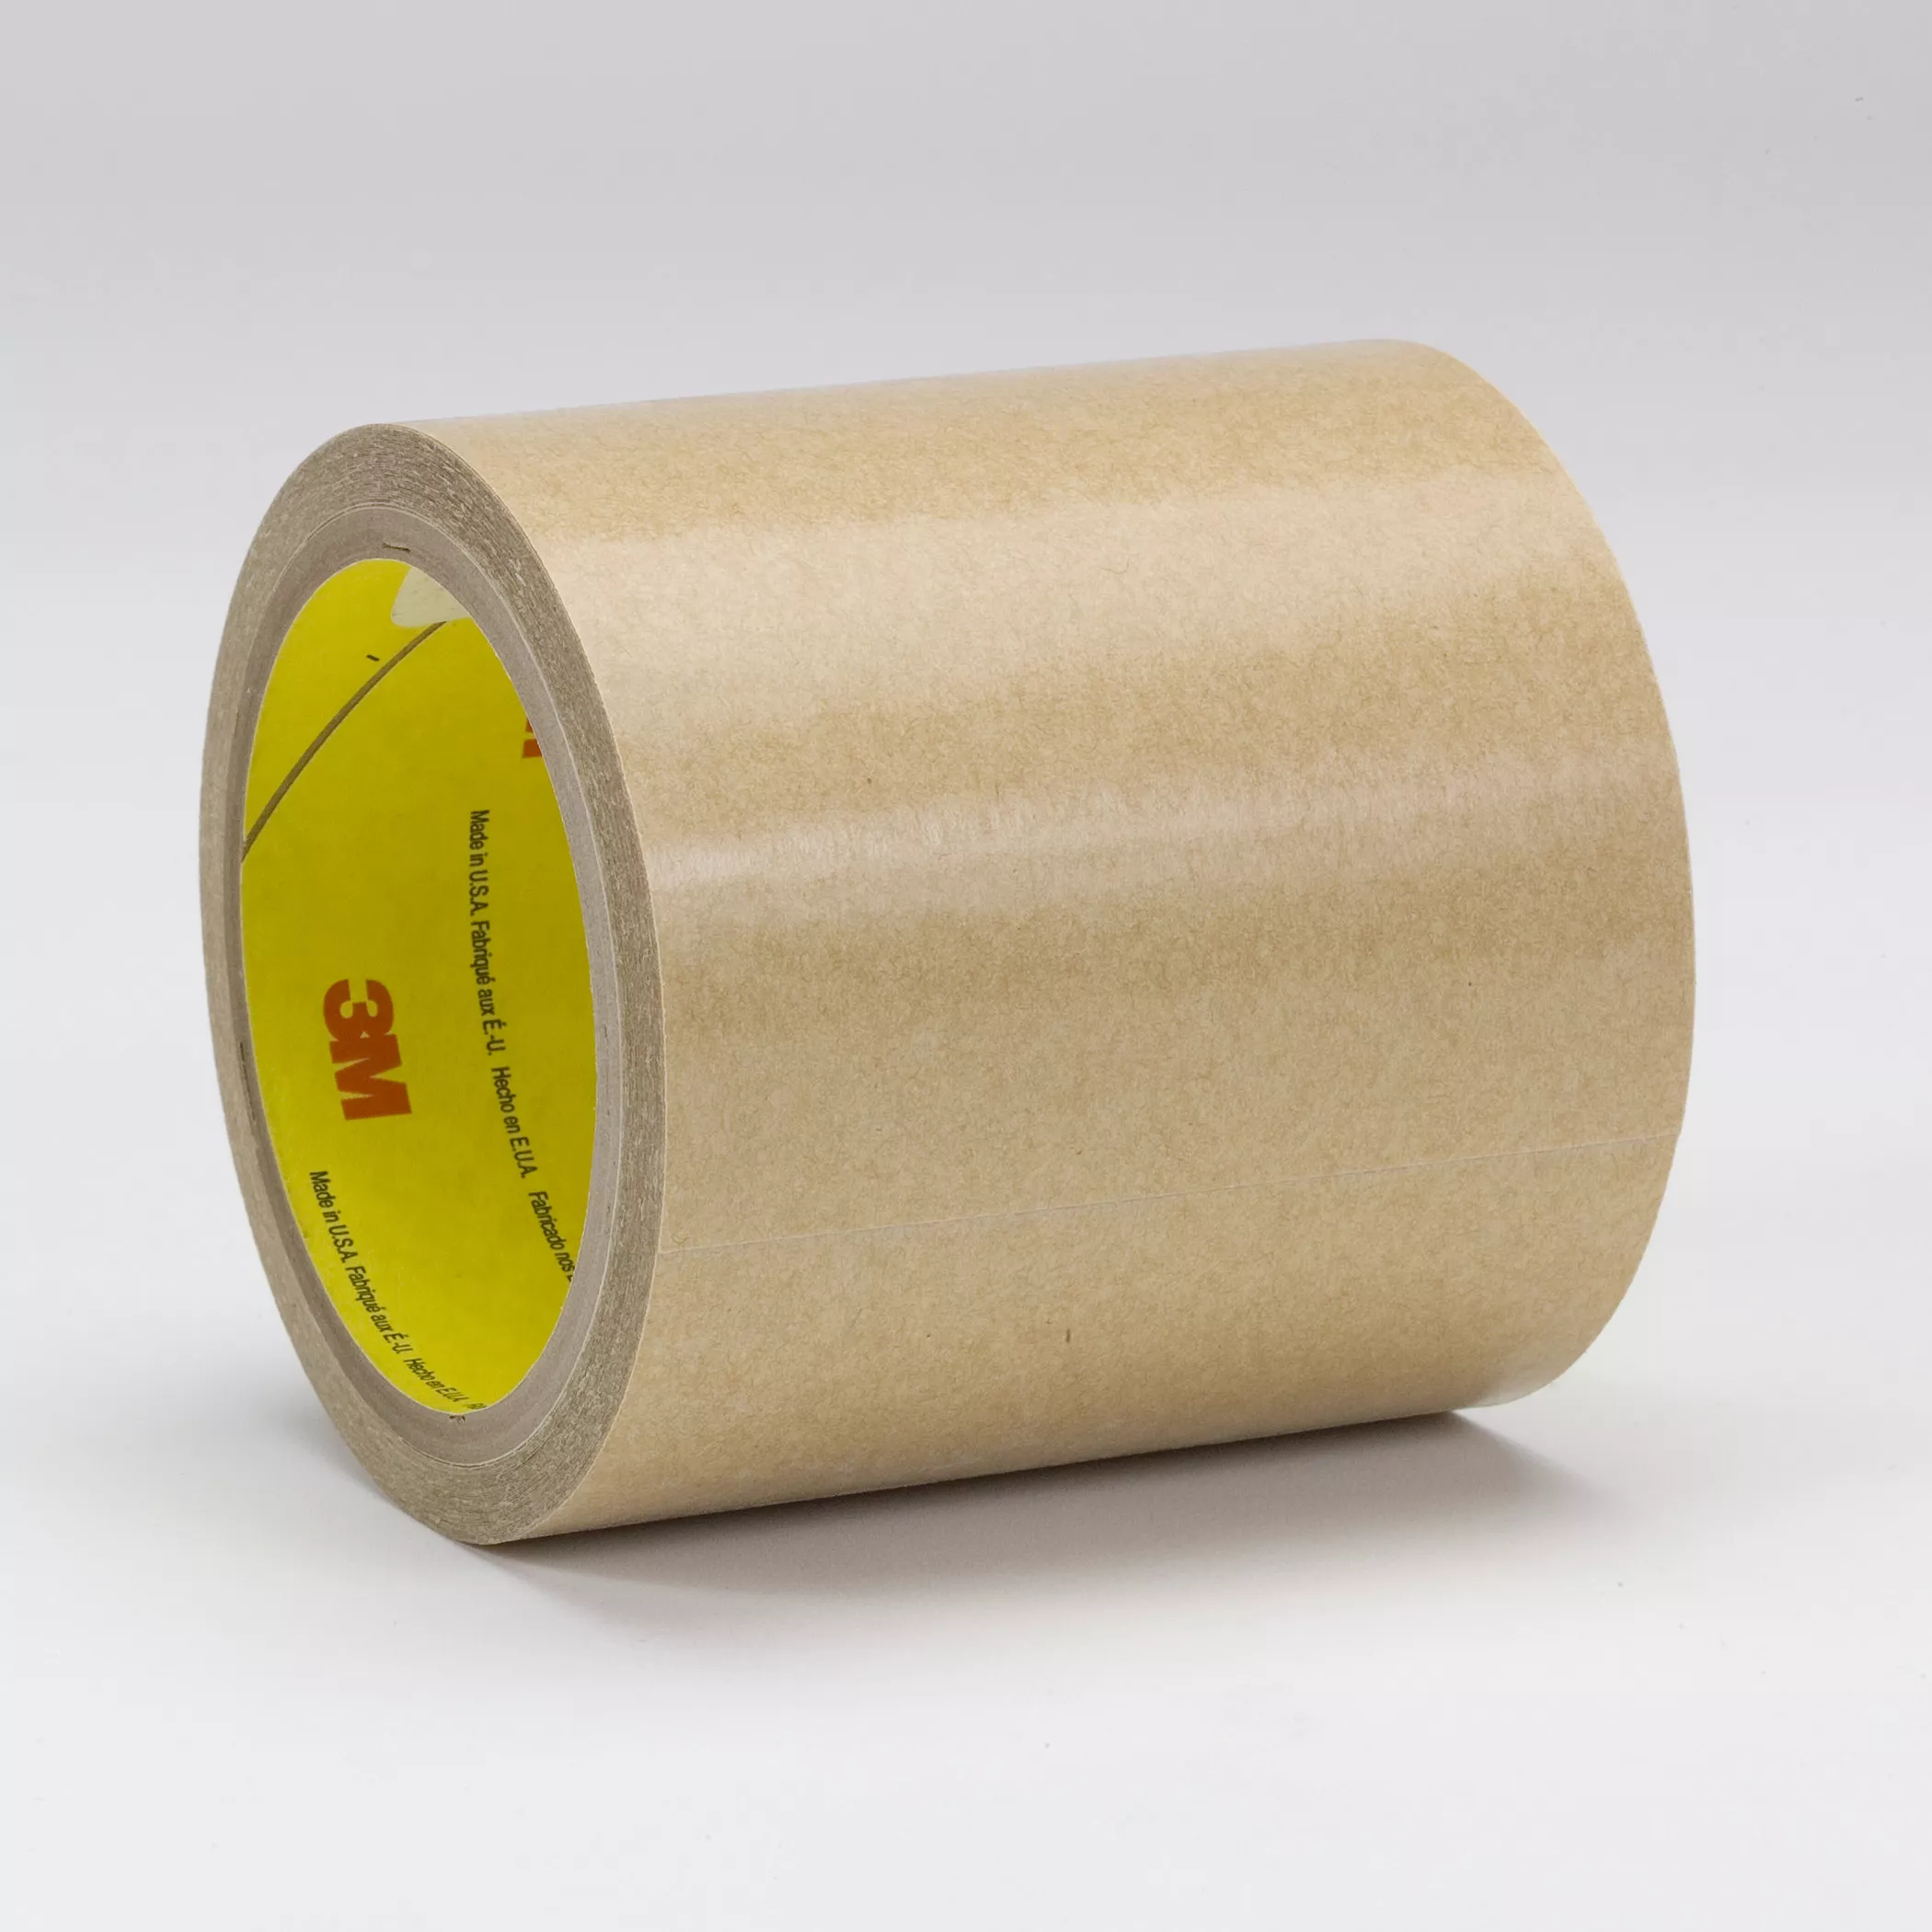 3M™ Adhesive Transfer Tape 9672, Clear, 24 in x 60 yd, 5 mil, 1
Roll/Case